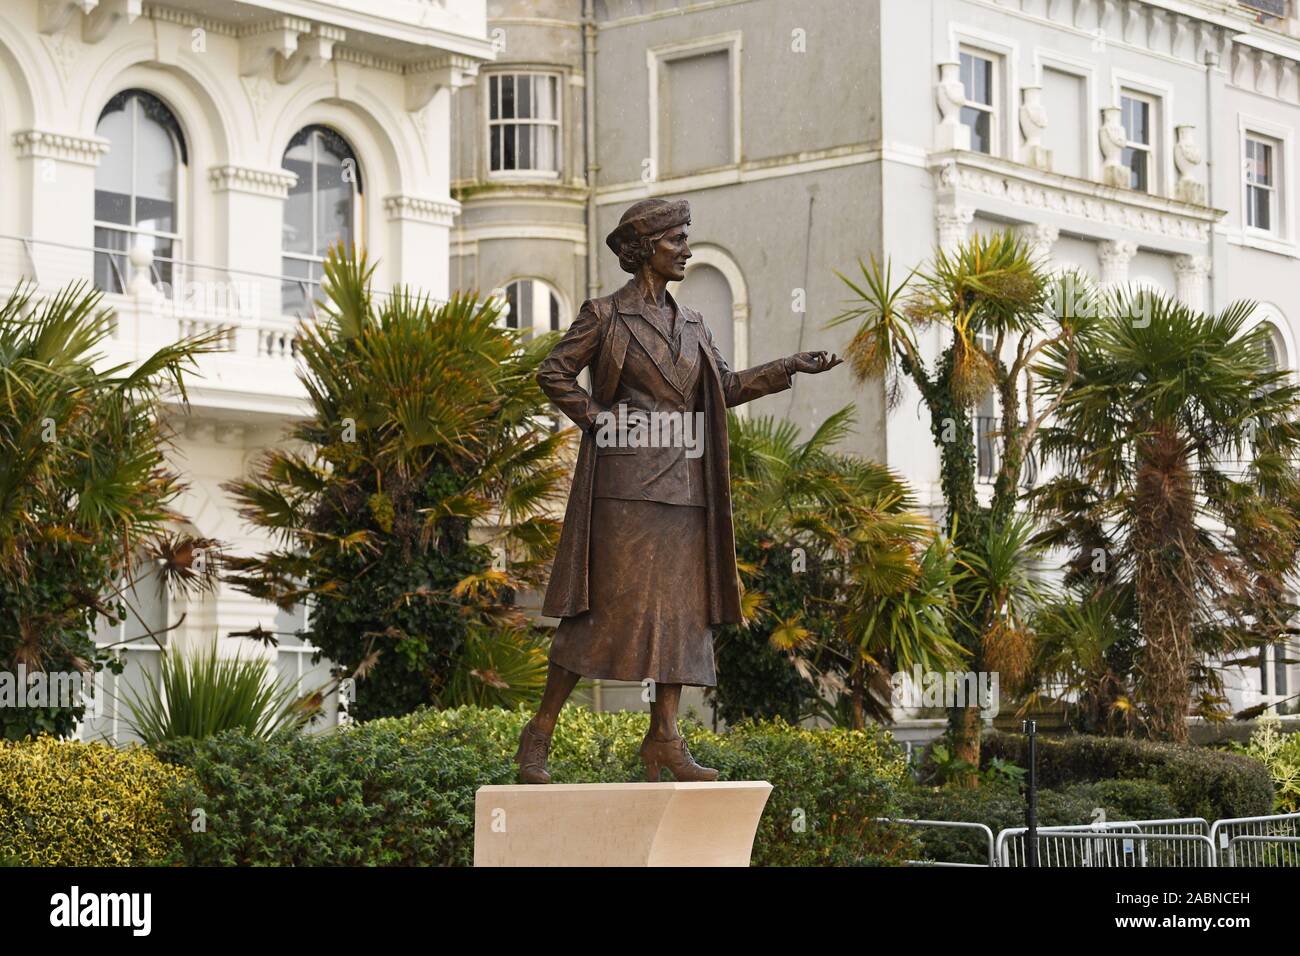 The statue of Nancy Astor, the first female MP, which was unveiled earlier today in Plymouth, Devon. Stock Photo